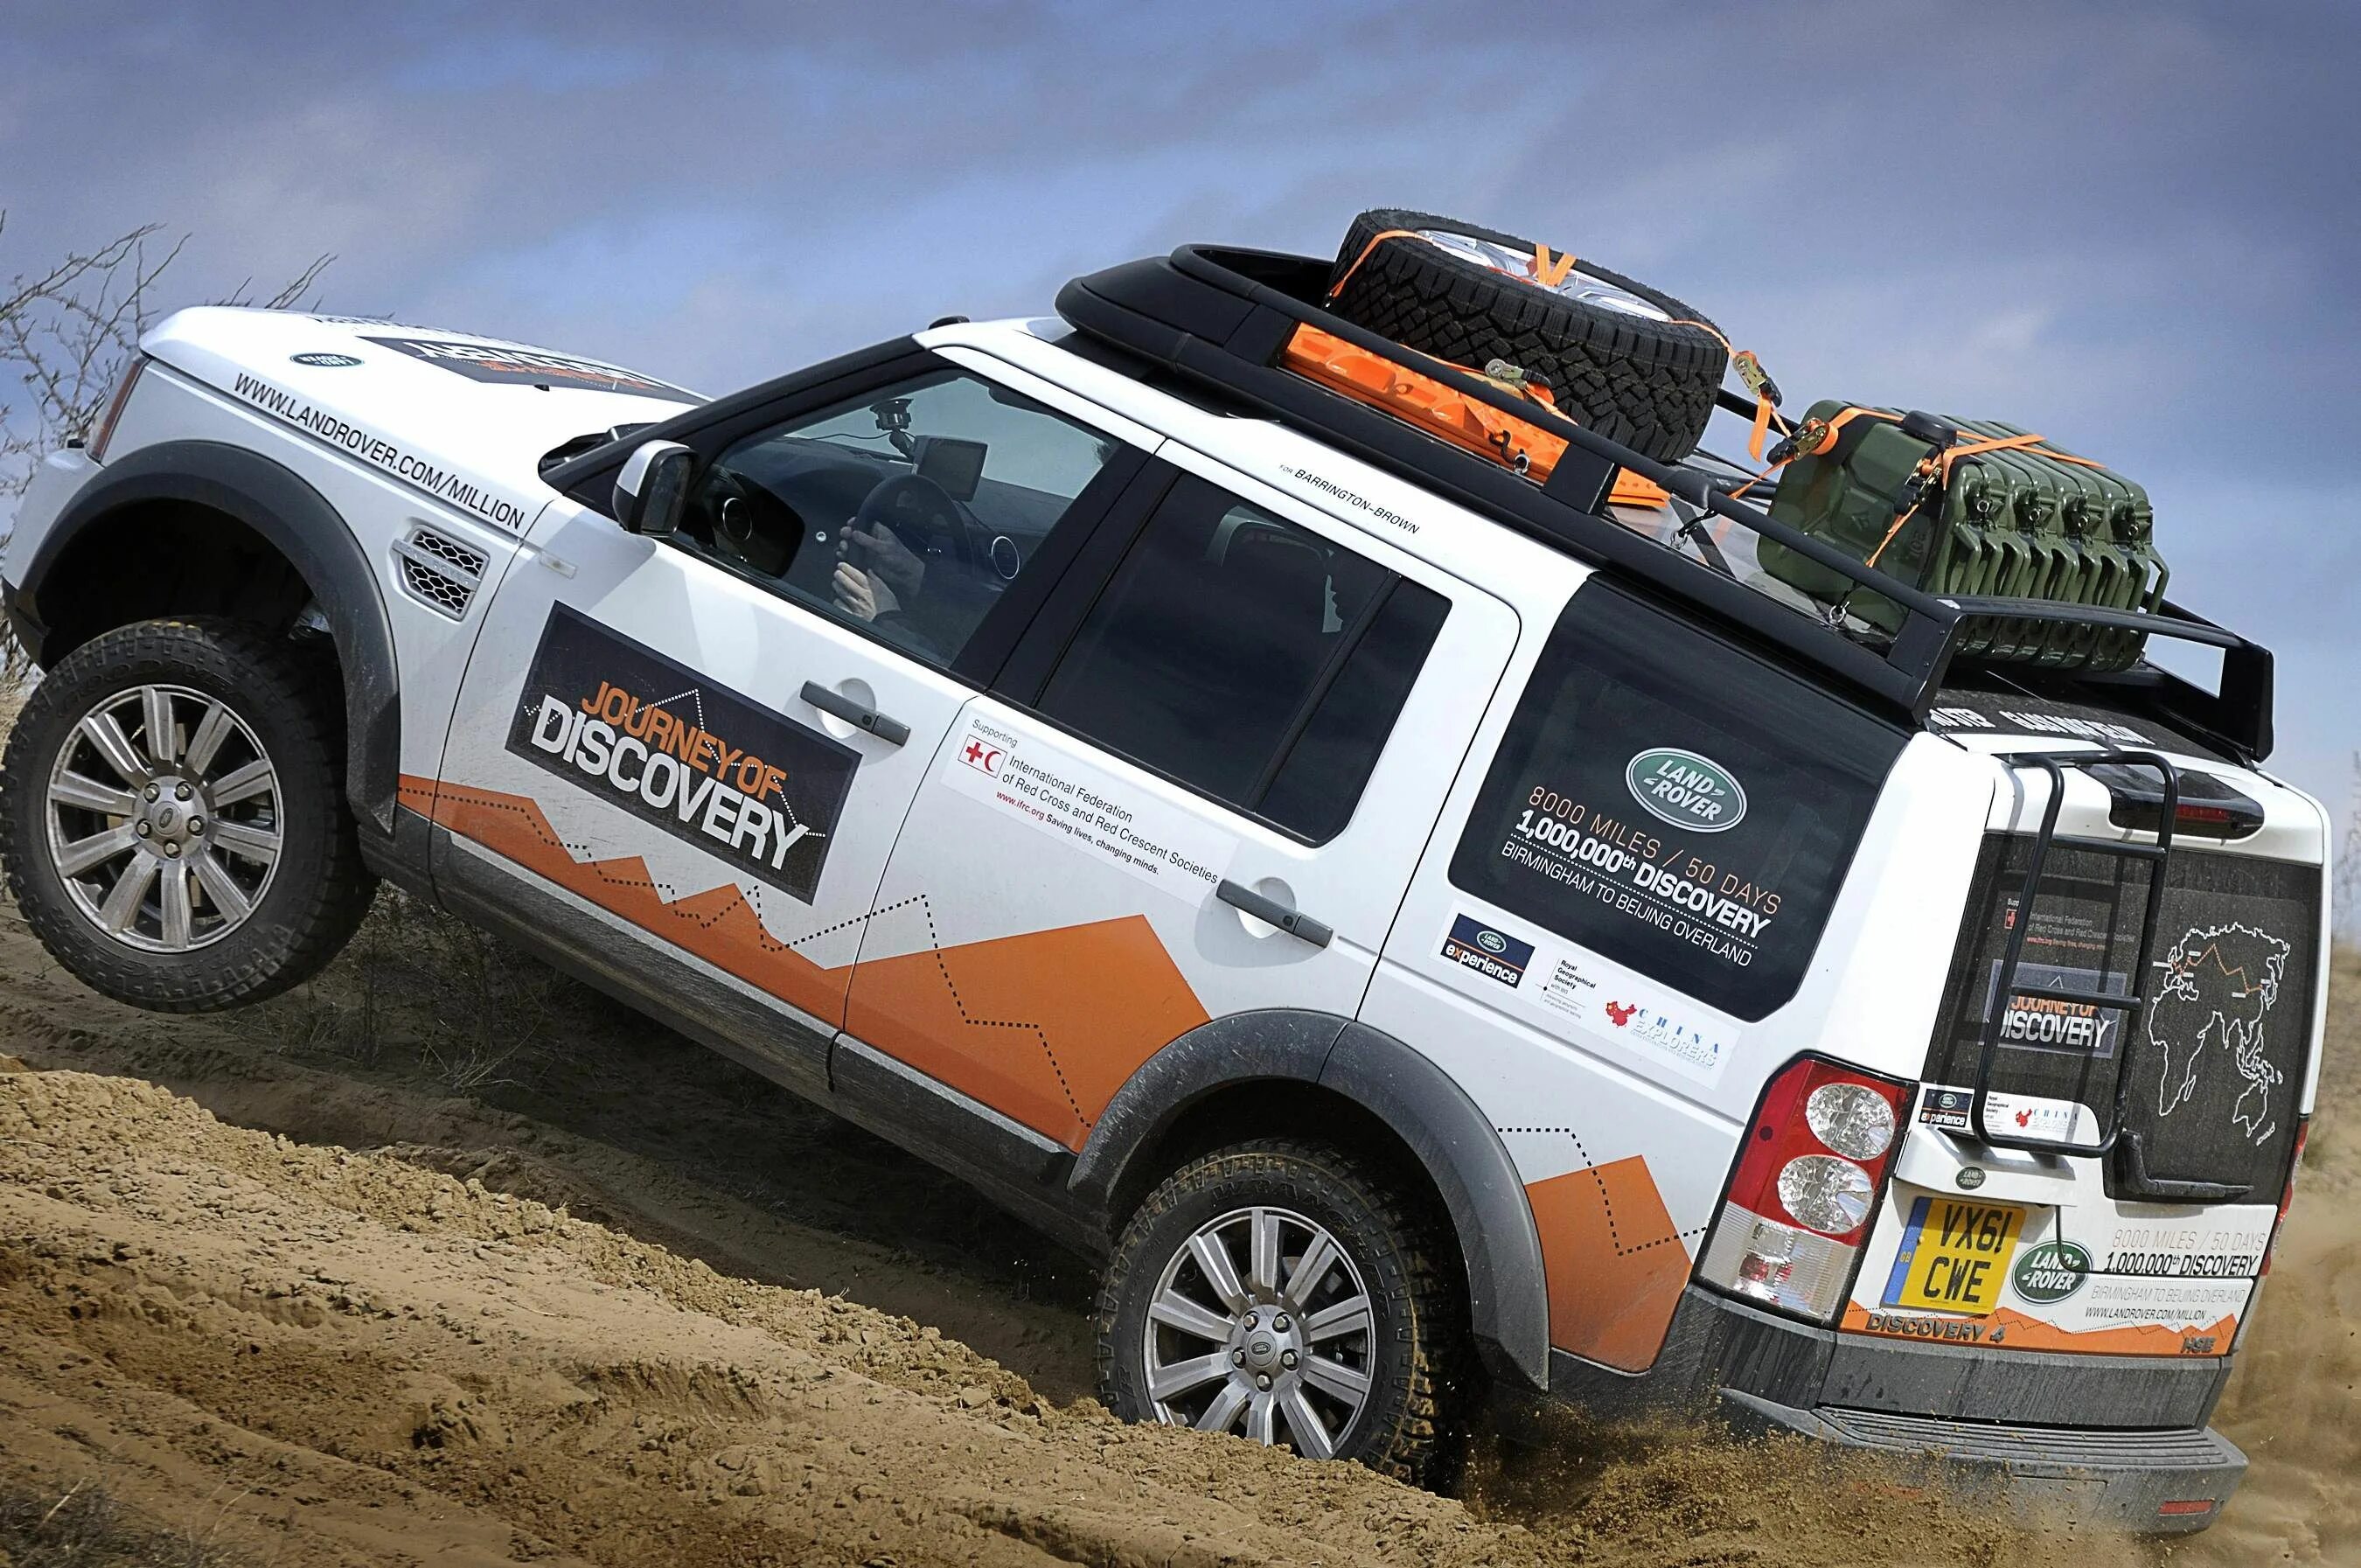 Land Rover Discovery 4 Экспедиция. Land Rover Discovery 4 экспедиционный. Ленд Ровер Дискавери 3 экспедиционник. Ленд Ровер Дискавери 4 Expedition.